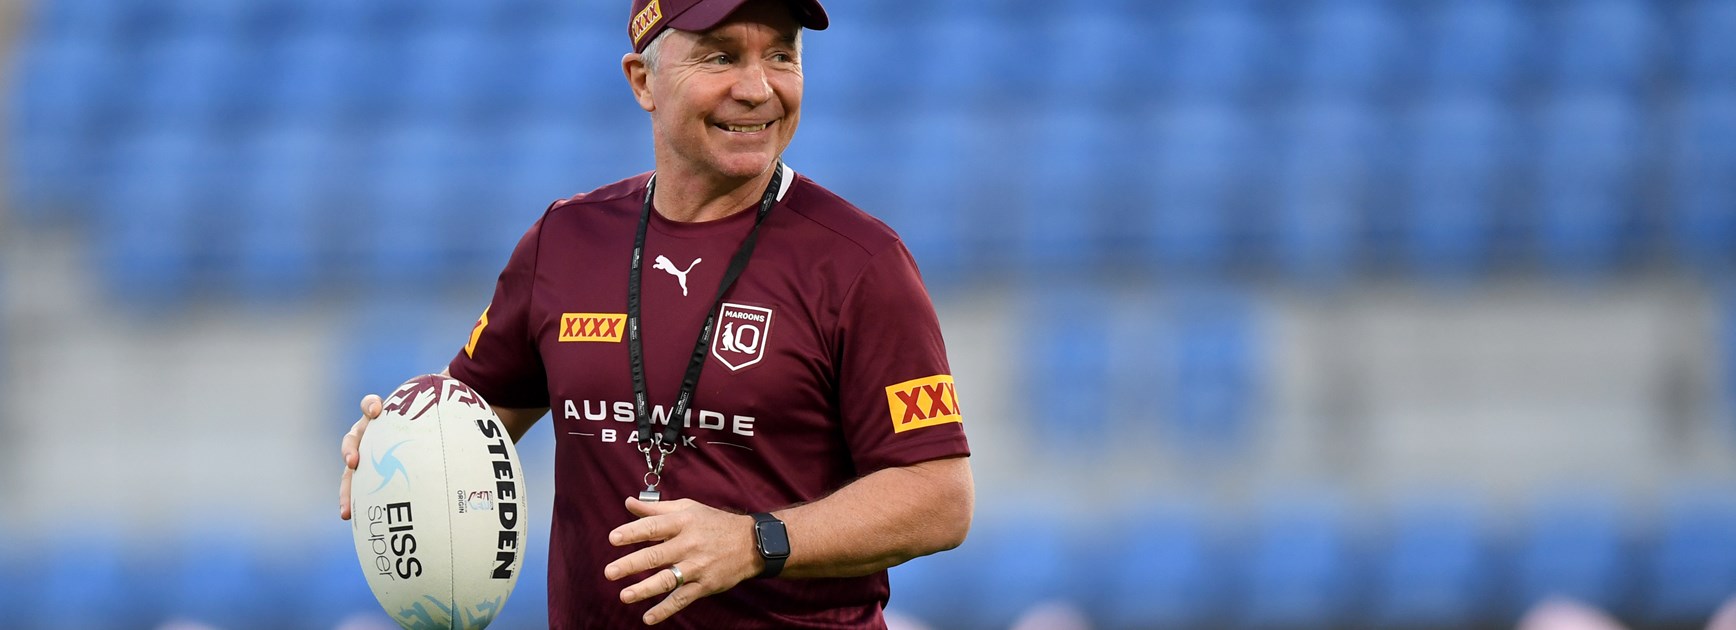 'The QRL and I have decided to move in different directions' - Green